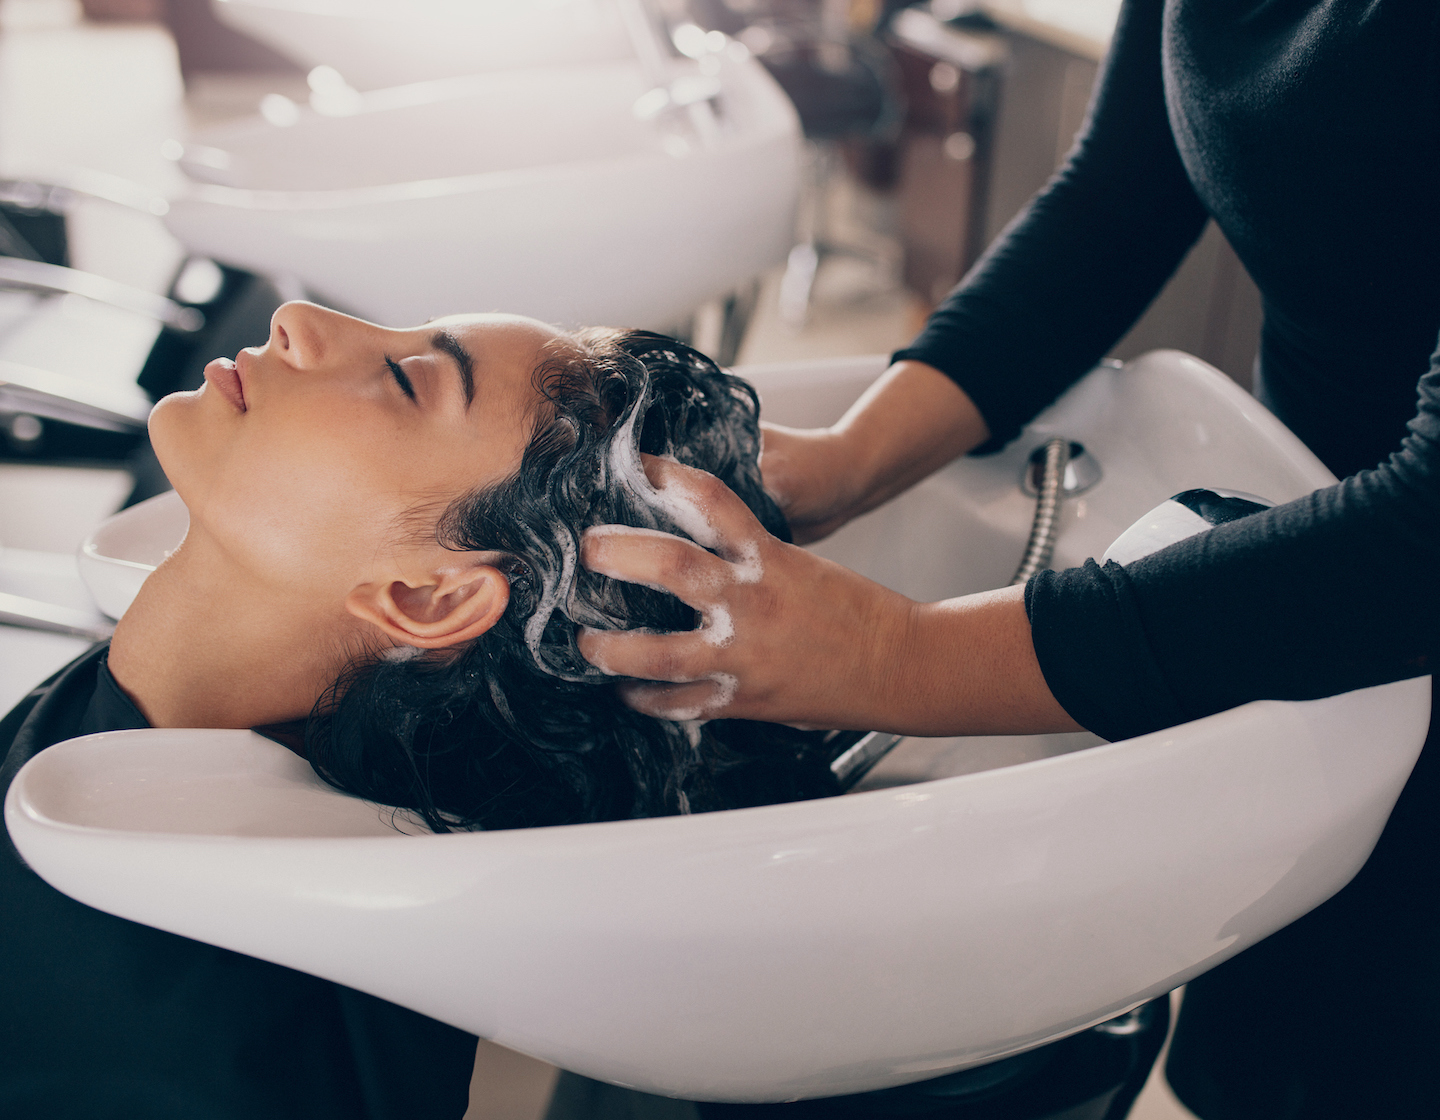 Hair Salons In Hong Kong: Best Hairdressers For Your Hair Cut Or Hairdo